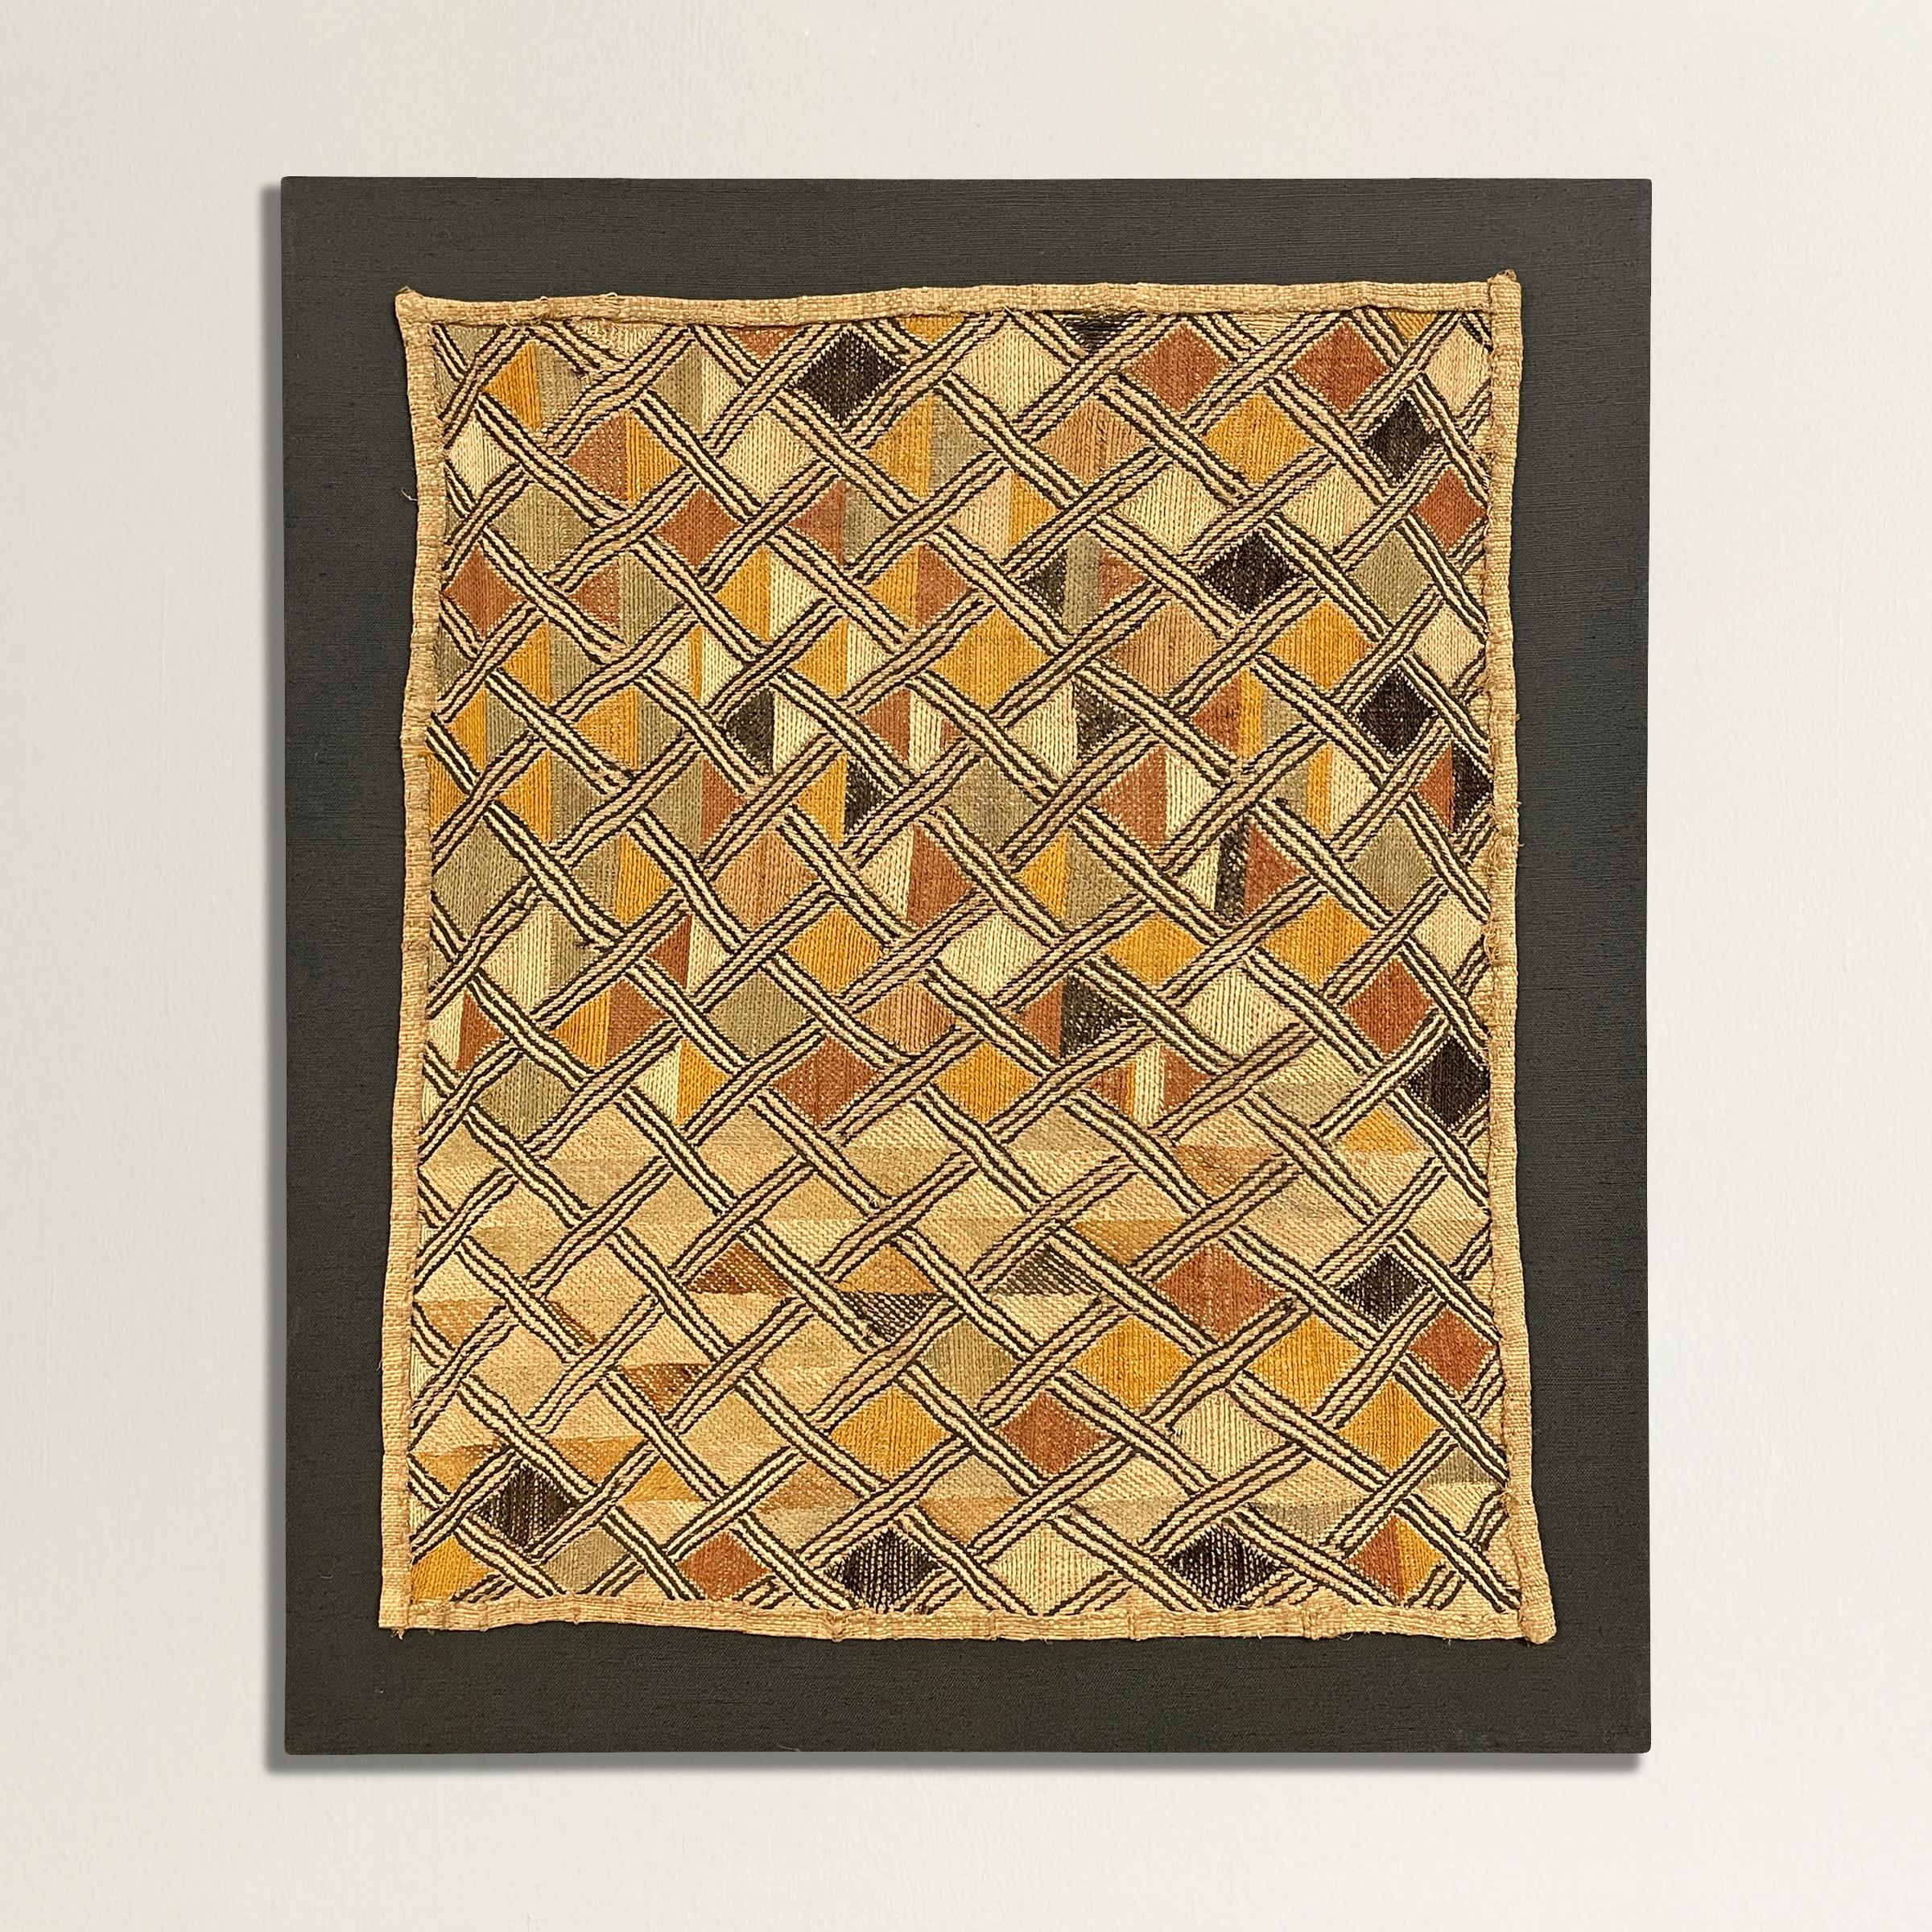 A wonderful mid-20th century Kuba Shoowa flat-weave multi-colored embroidered raffia cloth panel with a fantastic all-over geometric motif. Sometimes multiple panels are stitched together to create long dance skirts worn by men during various